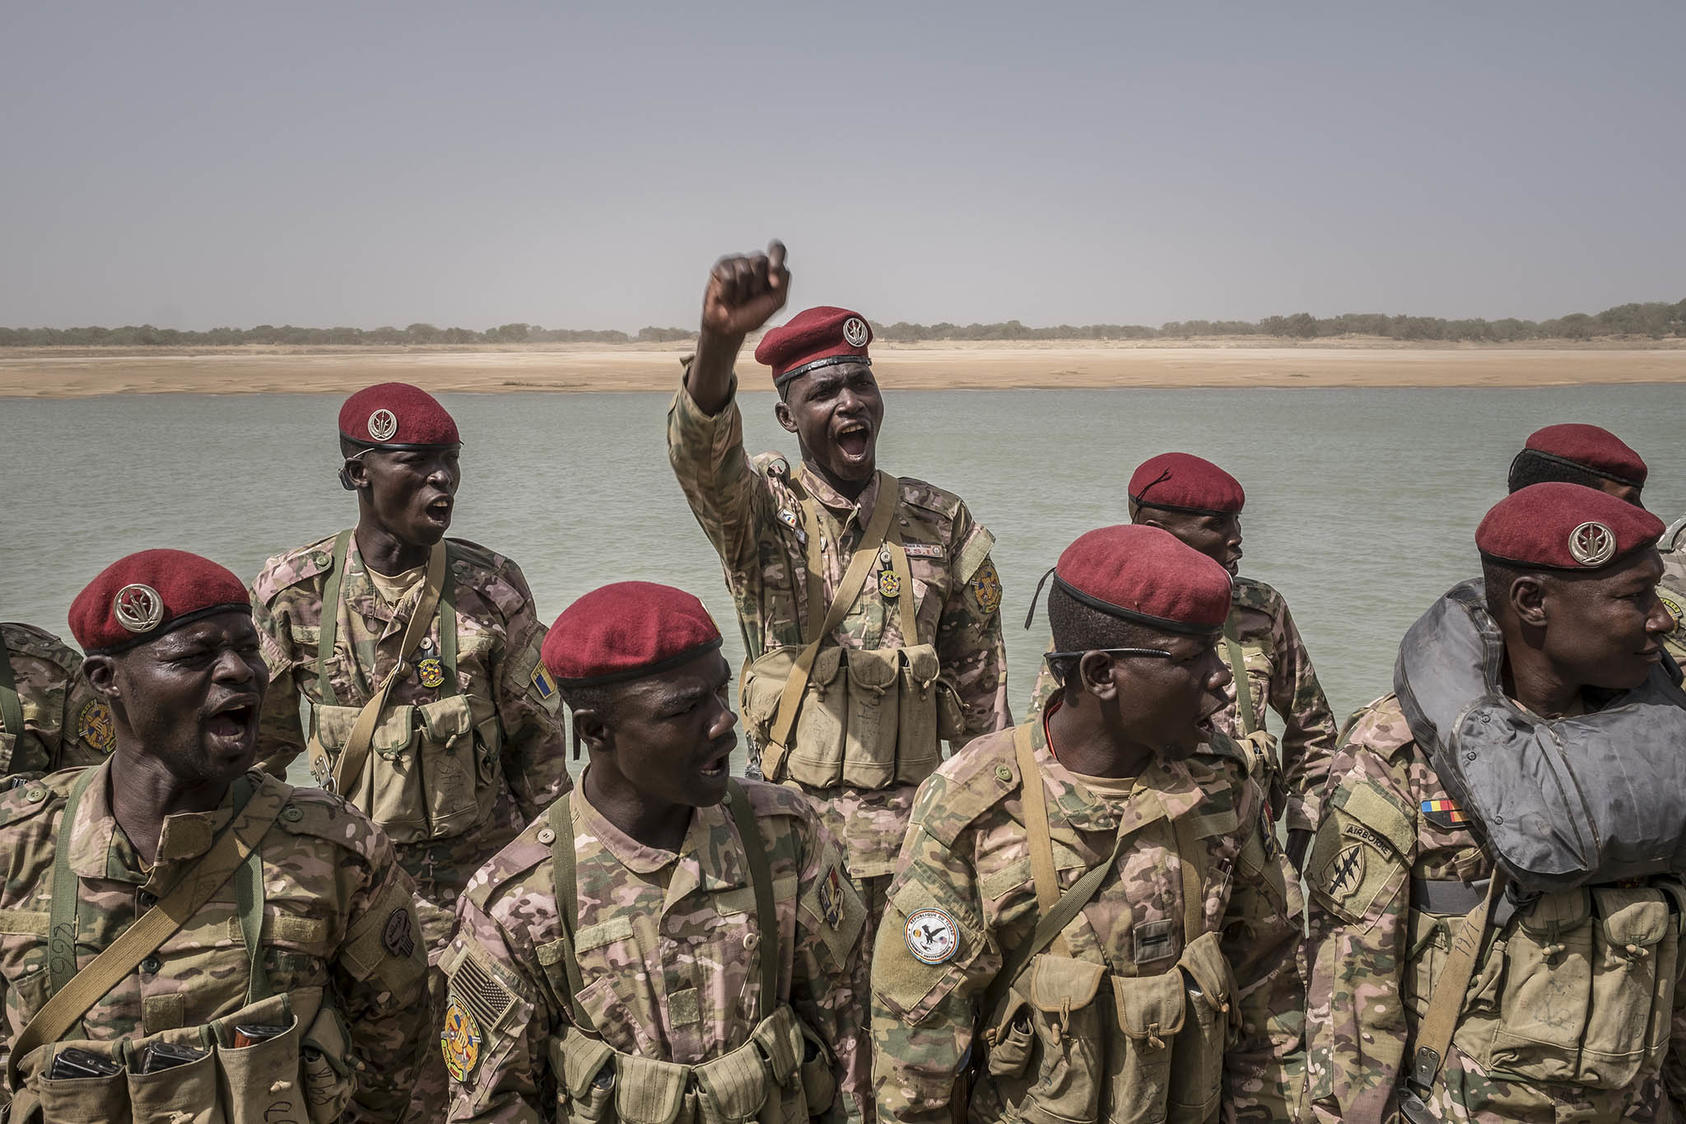 Chadian soldiers in the capital, N'Djamena, March 15, 2017. The ruling military council has made little progress toward a democratic transition as the deadline nears. (Bryan Denton/The New York Times)